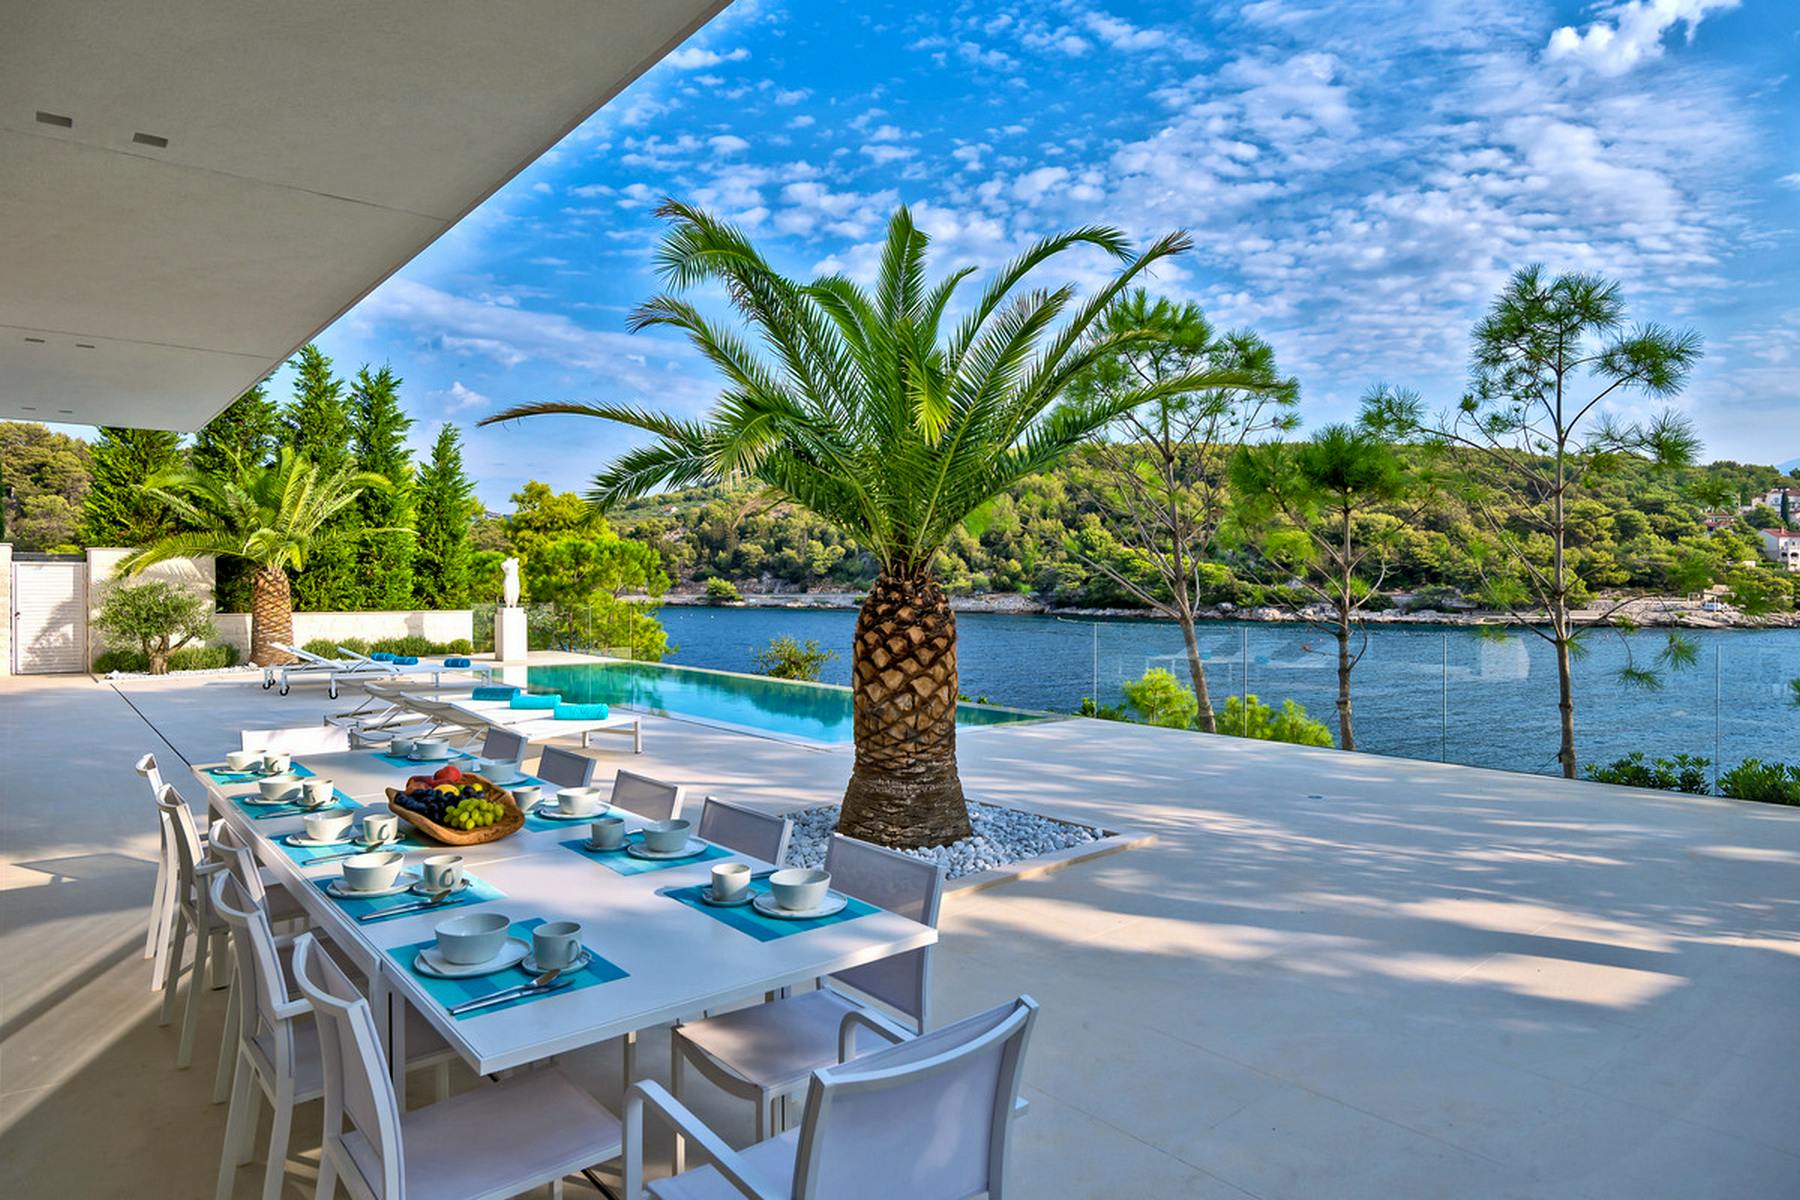 Dining area by the pool